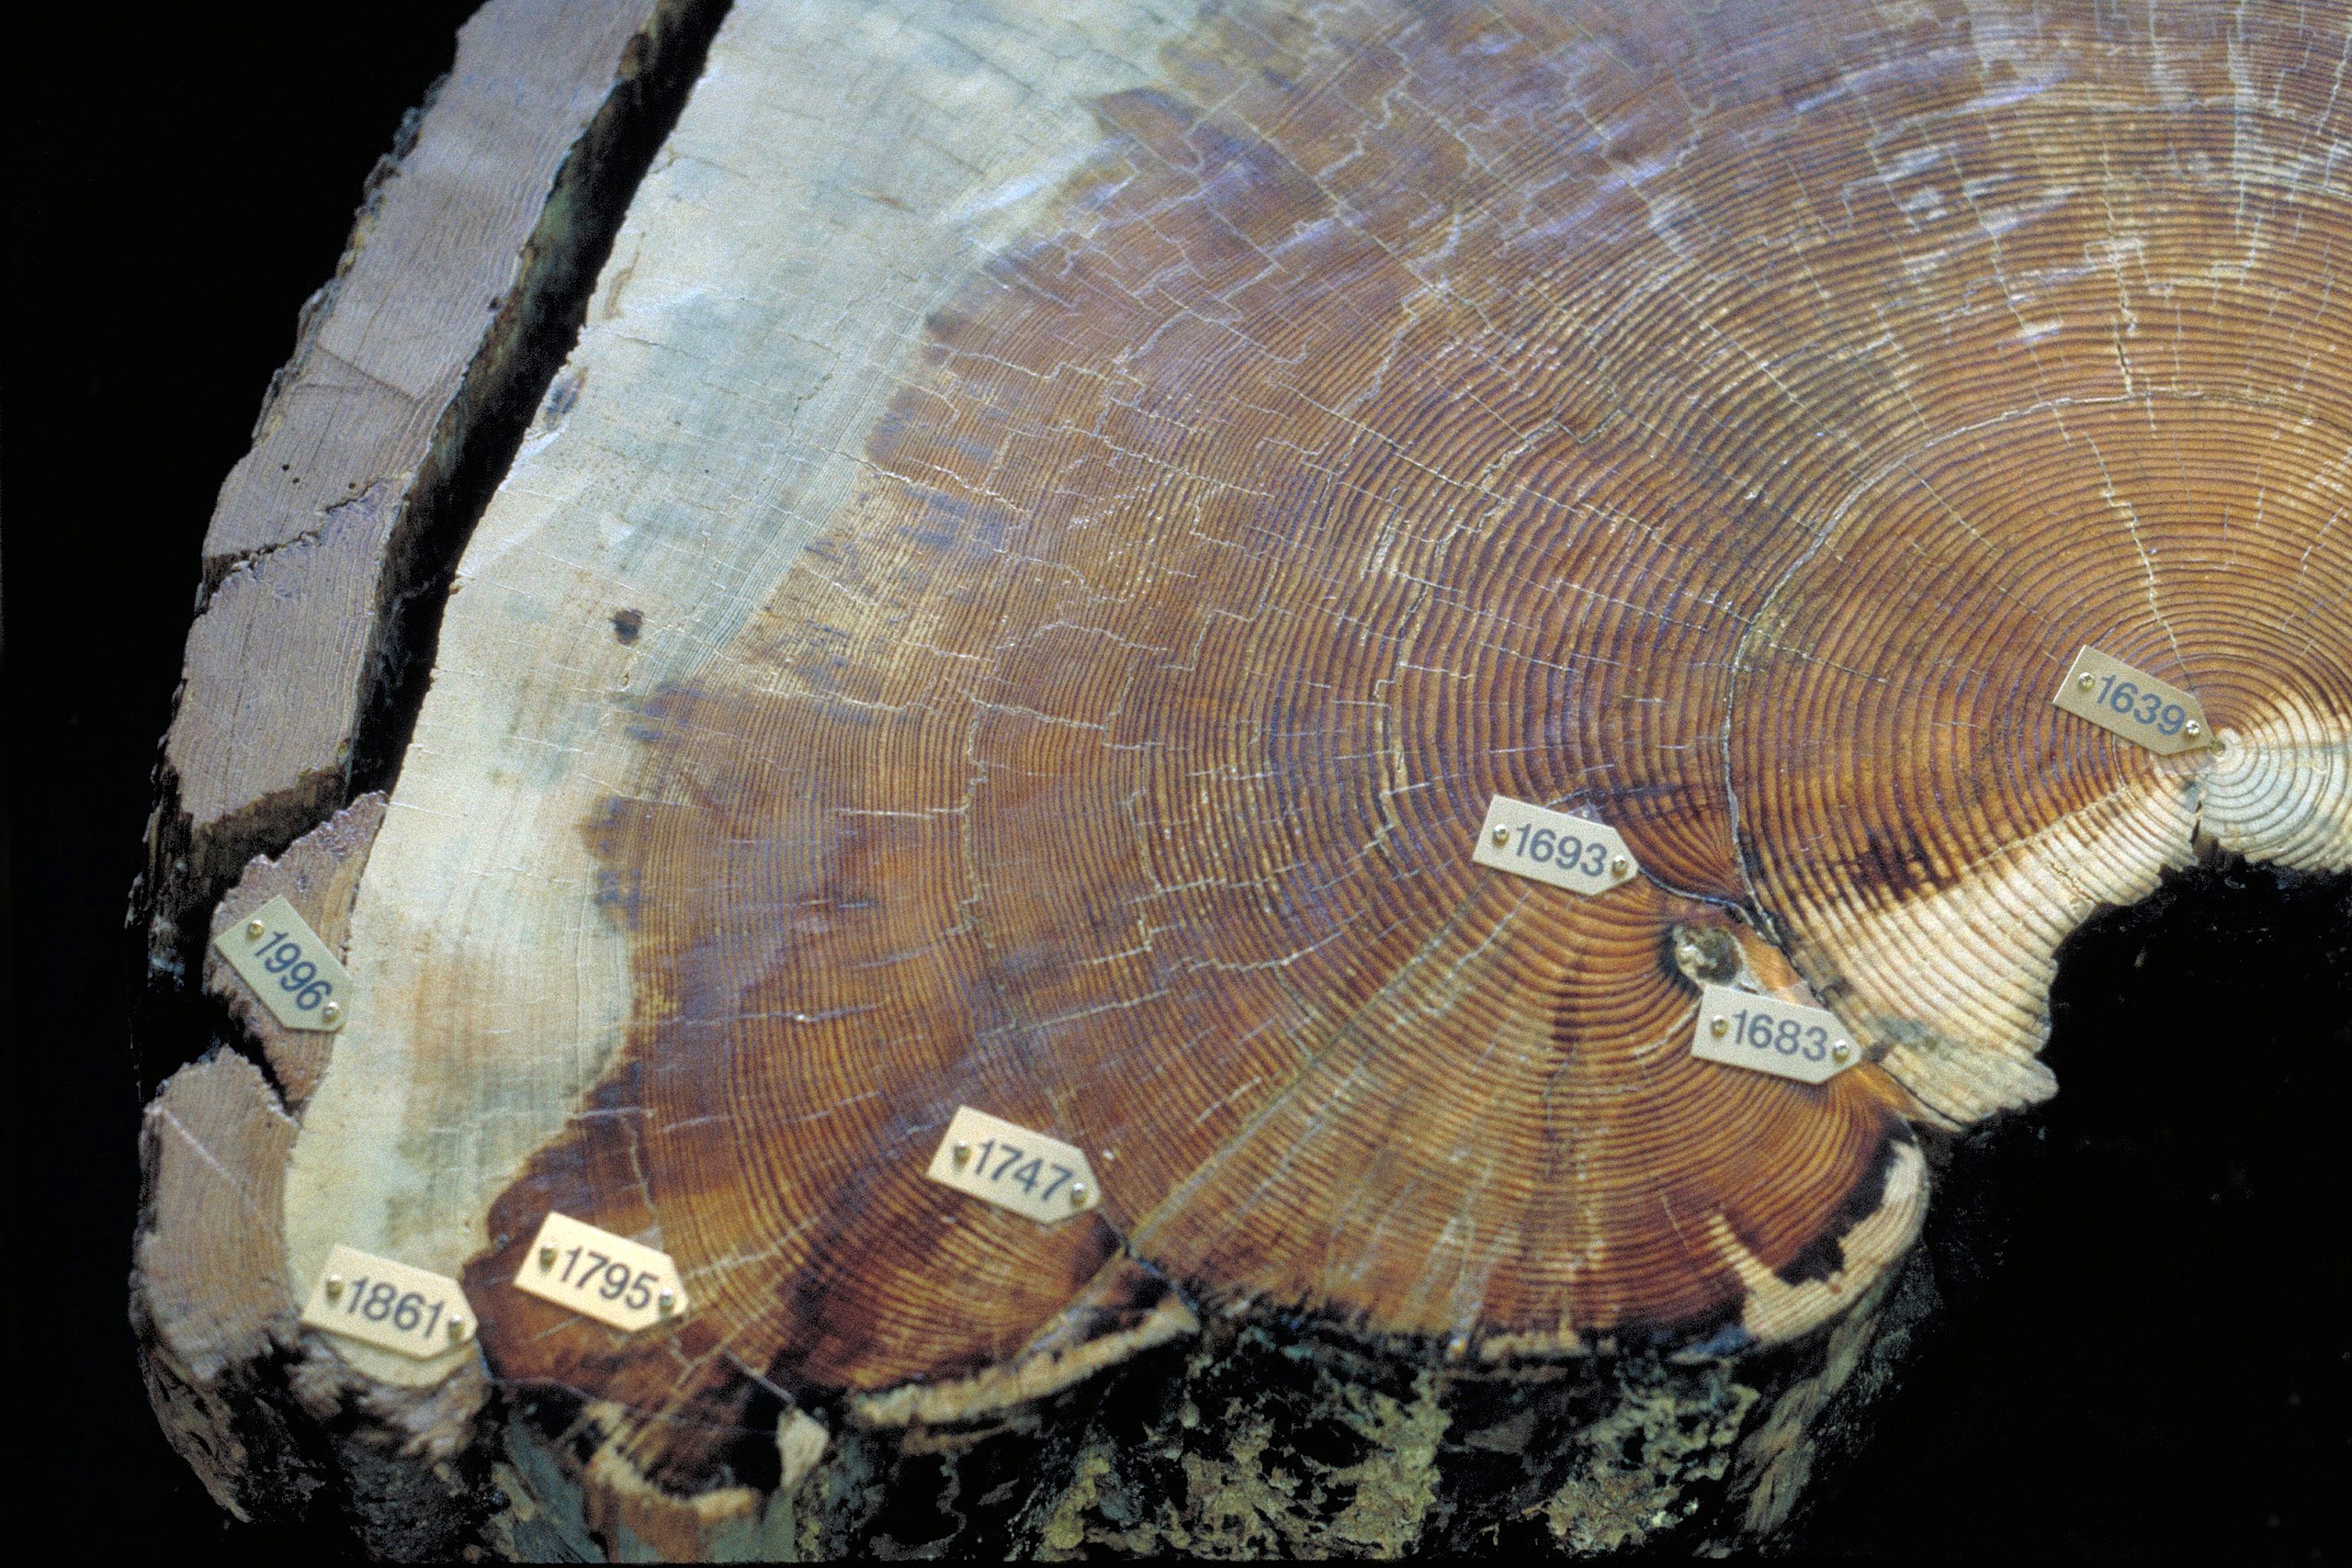 The cross section of a pinus ponderosa trunk with rings labeled from the center out: 1639, 1683, 1693, 1747, 1795, 1861, 1996